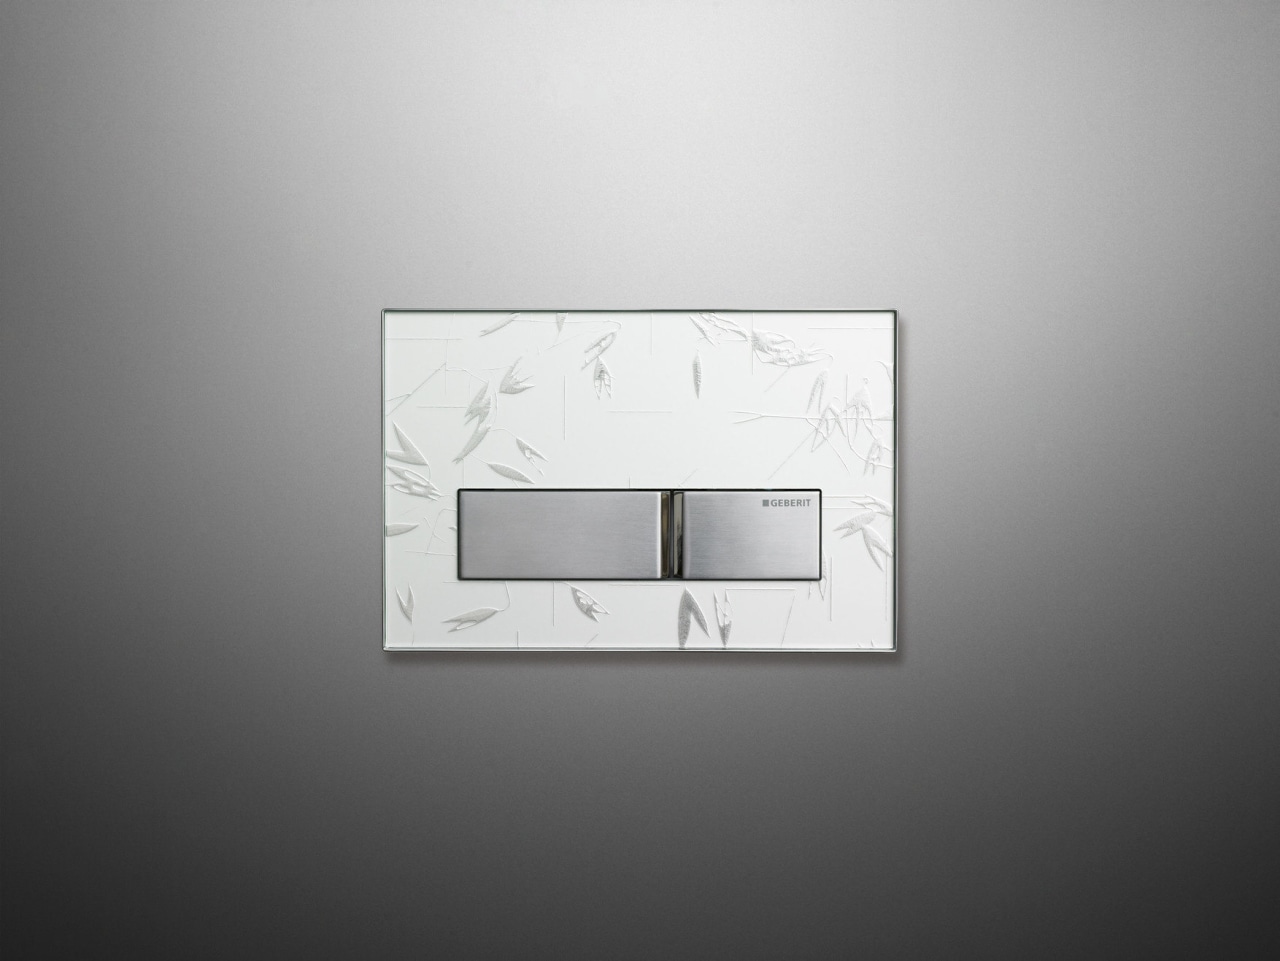 View of bathroom feature. design, product, product design, gray, white